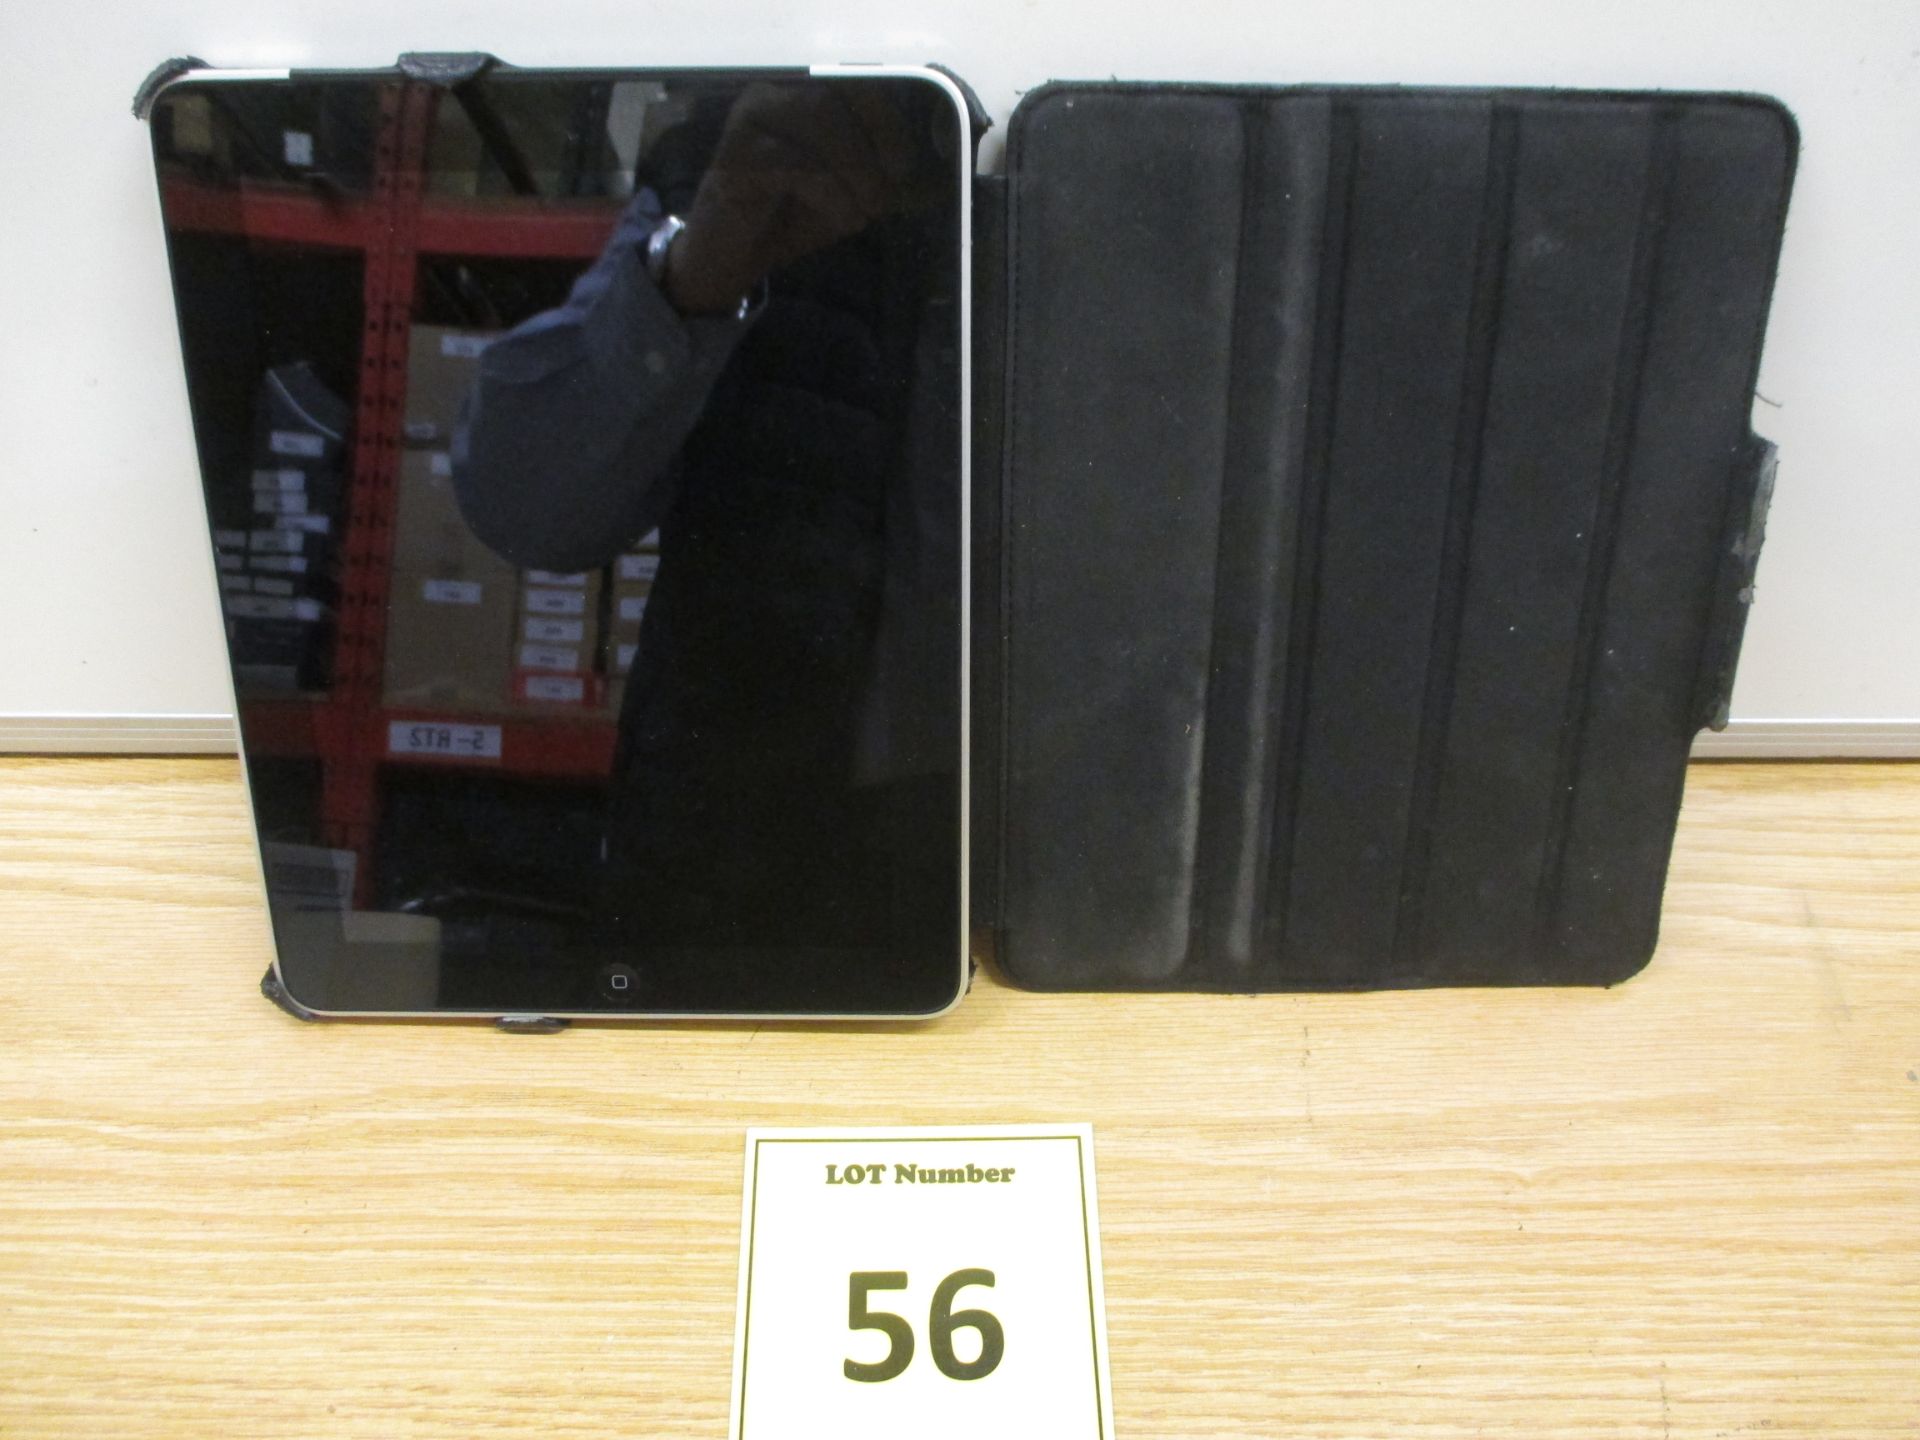 APPLE IPAD 64GB A1337 (BACK COVER SLIGHTLY DENTED - SEE PHOTOS) WITH CASE - Image 6 of 6